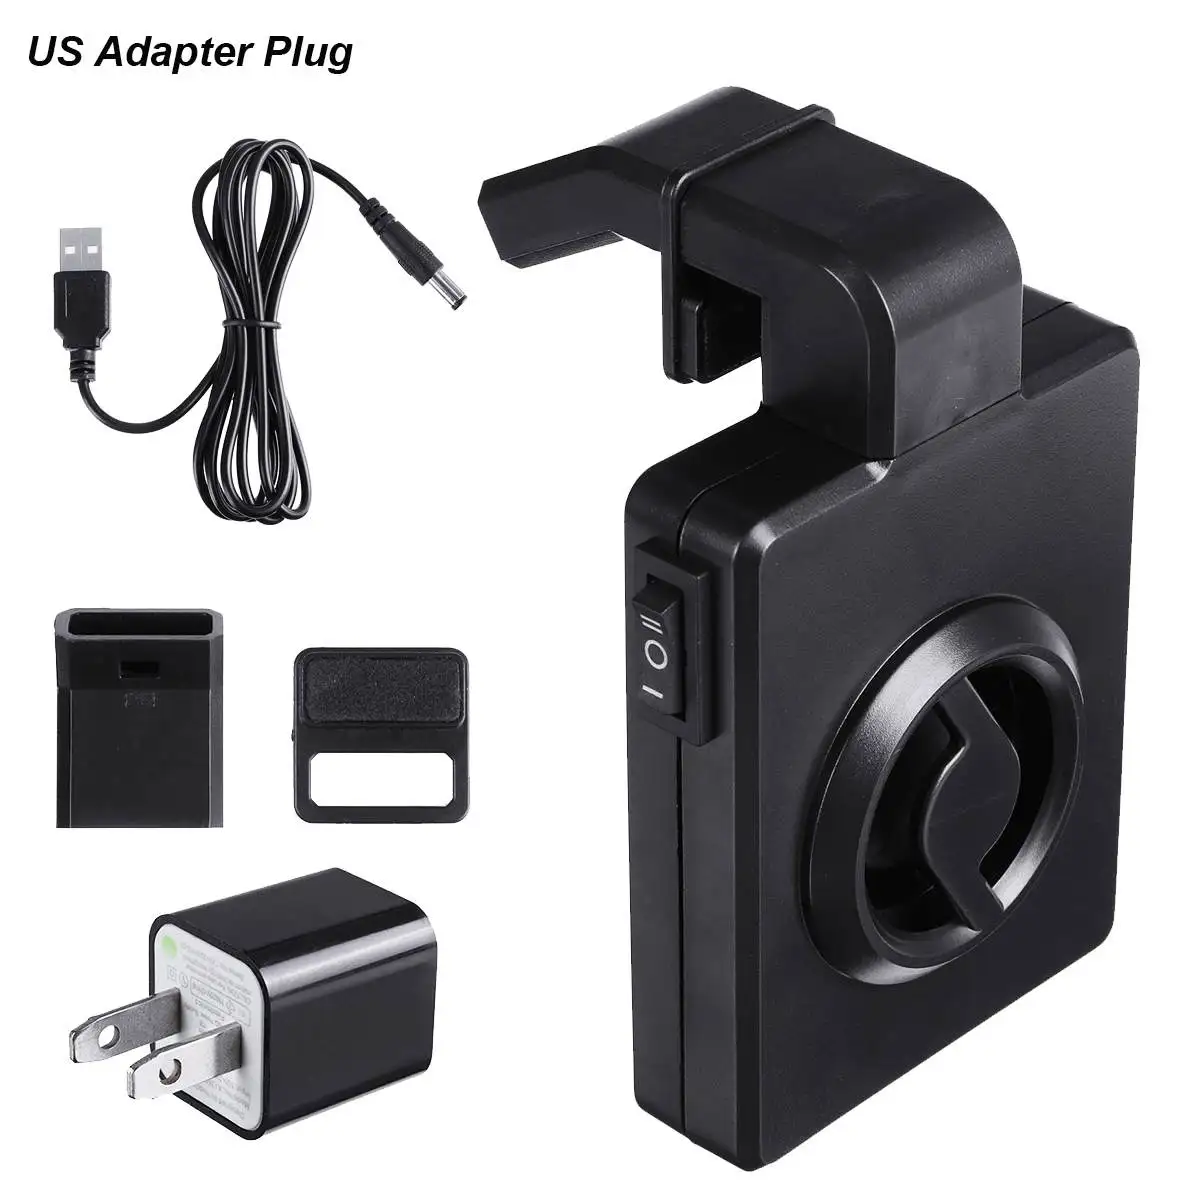 aquarium fish tank mini cooling fan hang on cooling chiller fan with USB charge 